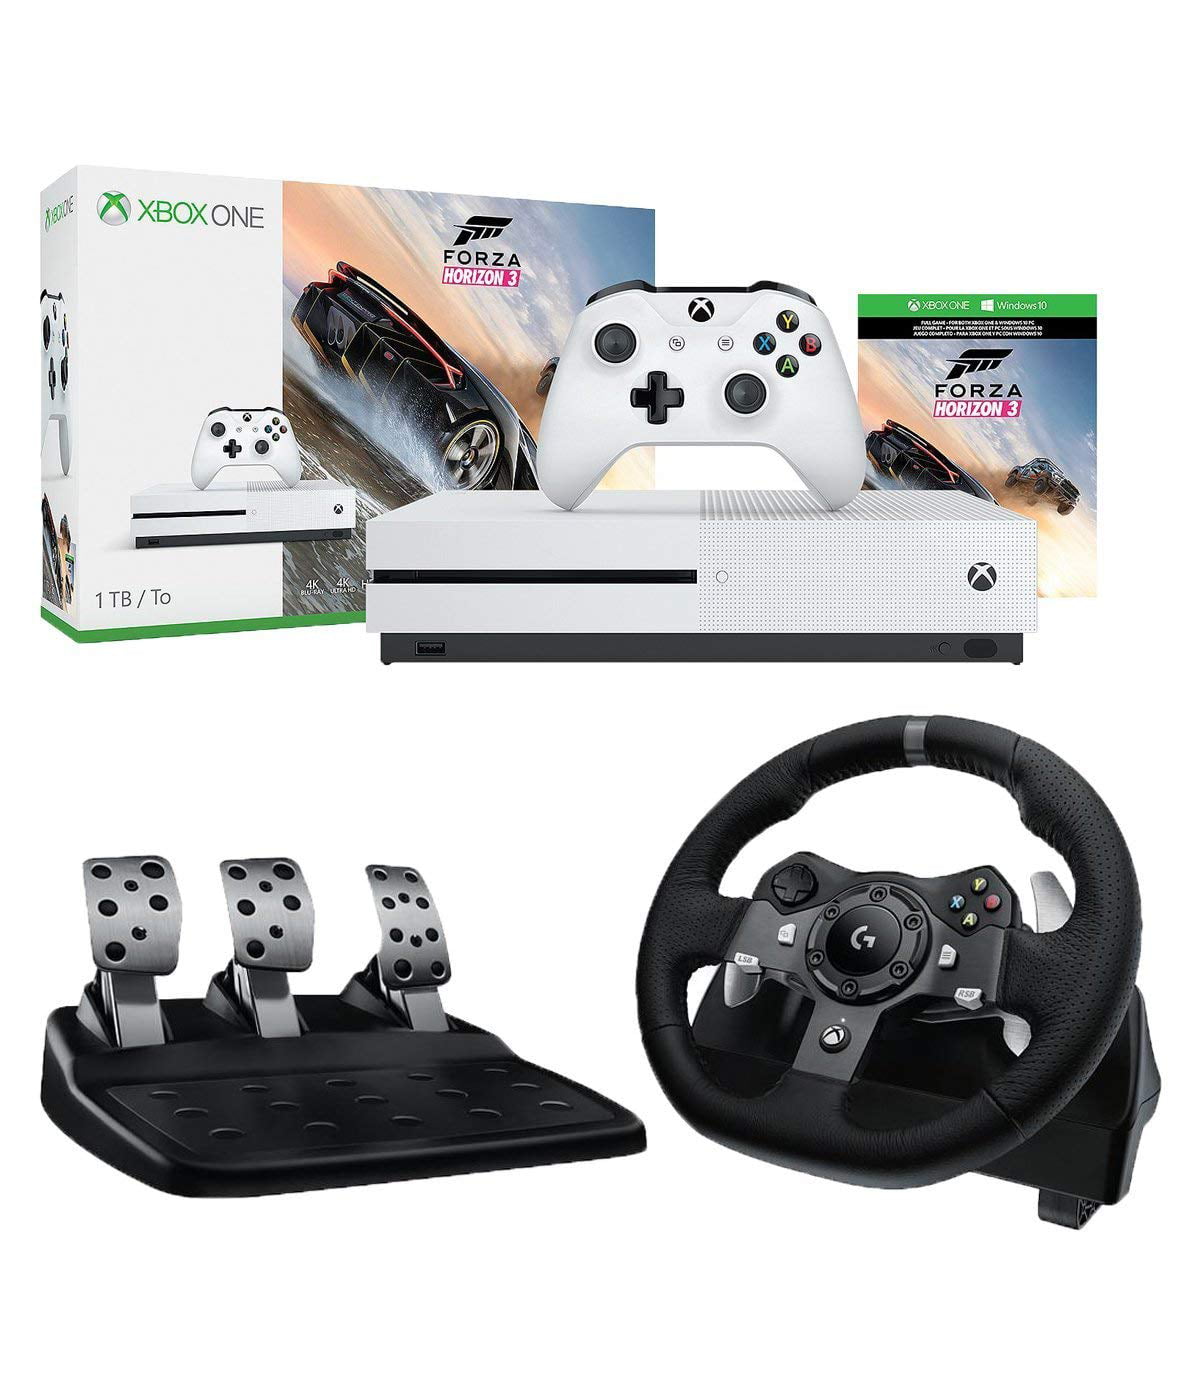 g920 driving force racing wheel for xbox one